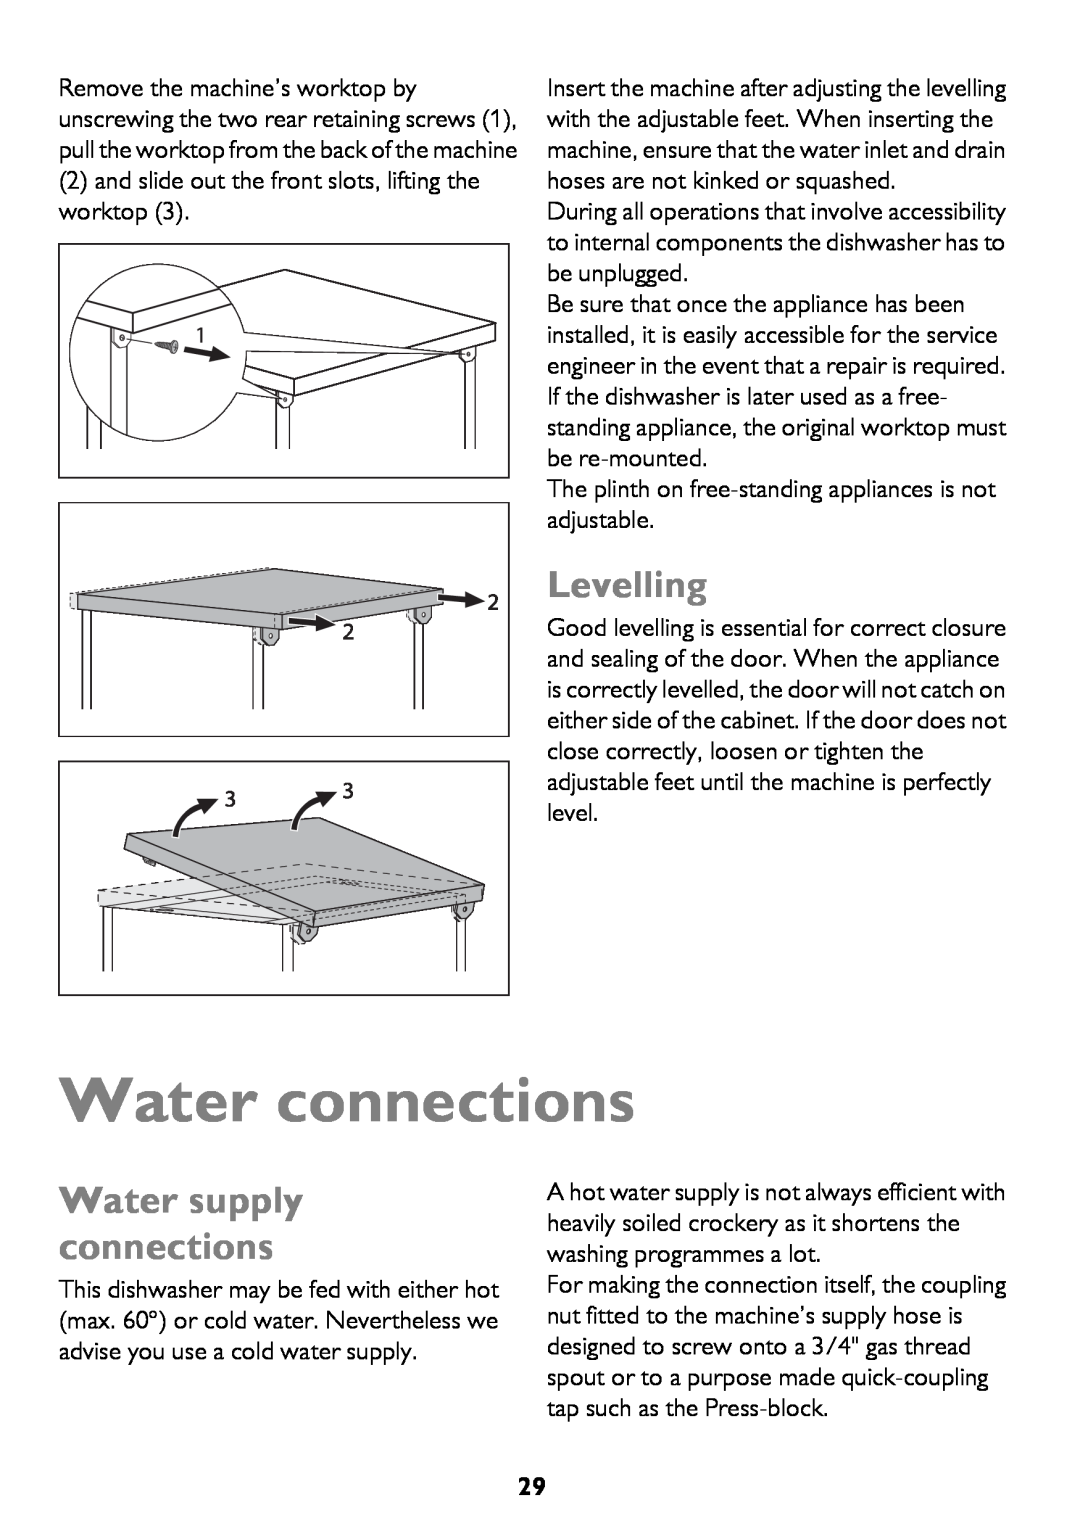 John Lewis JLDWW 906 instruction manual Water connections, Levelling, Water supply connections 